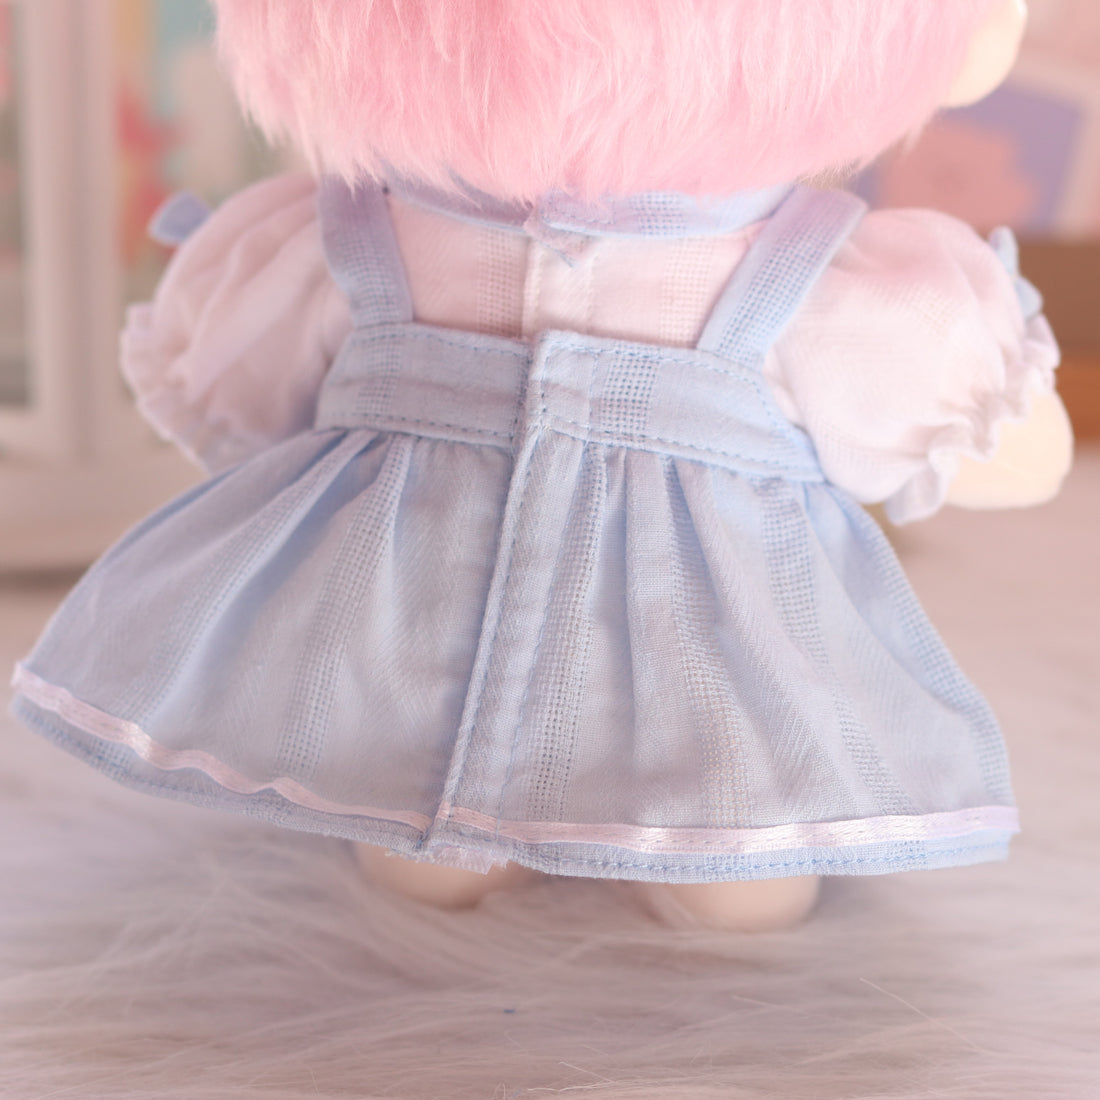 Plushie Clothing - Starry Cloud Dress